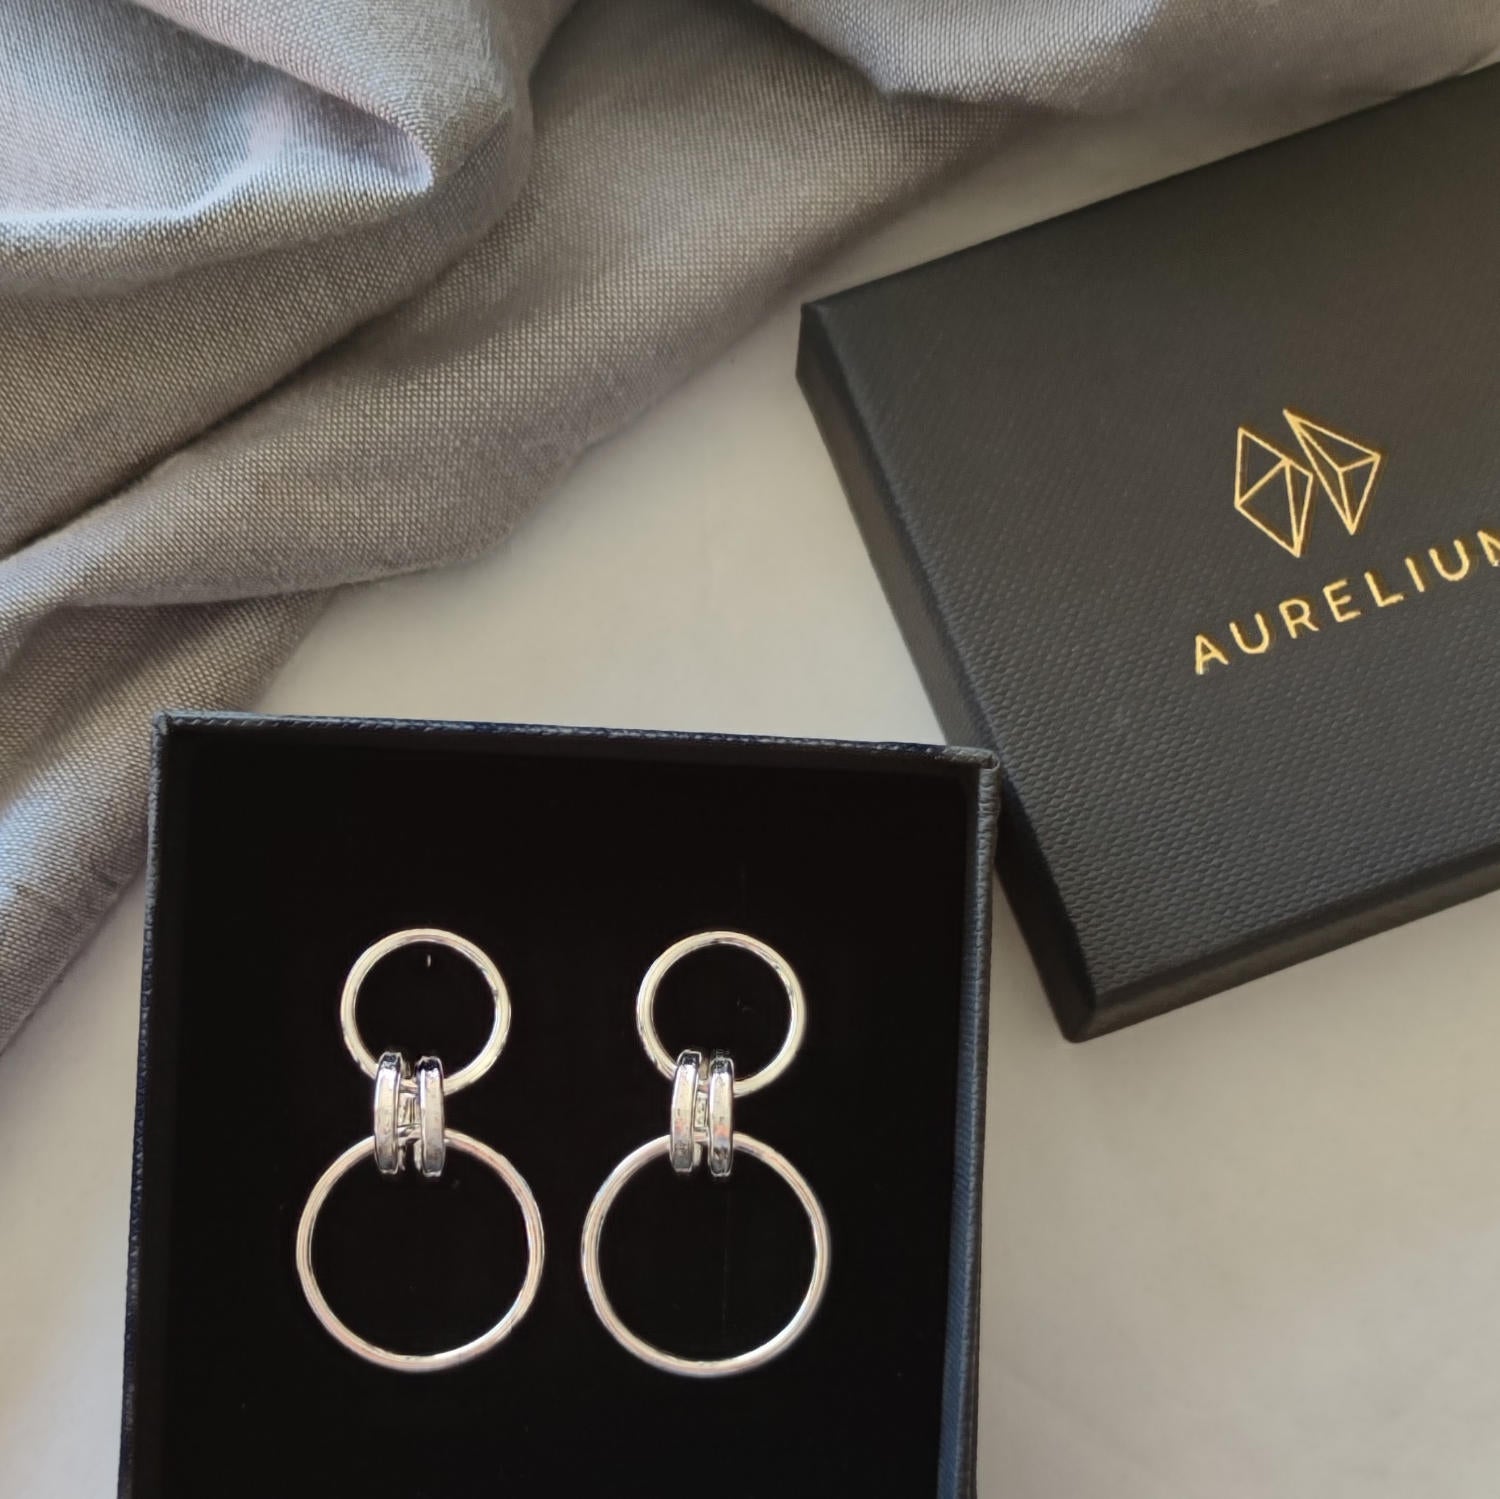 sterling silver link earrings by aurelium in signature gift ready packaging